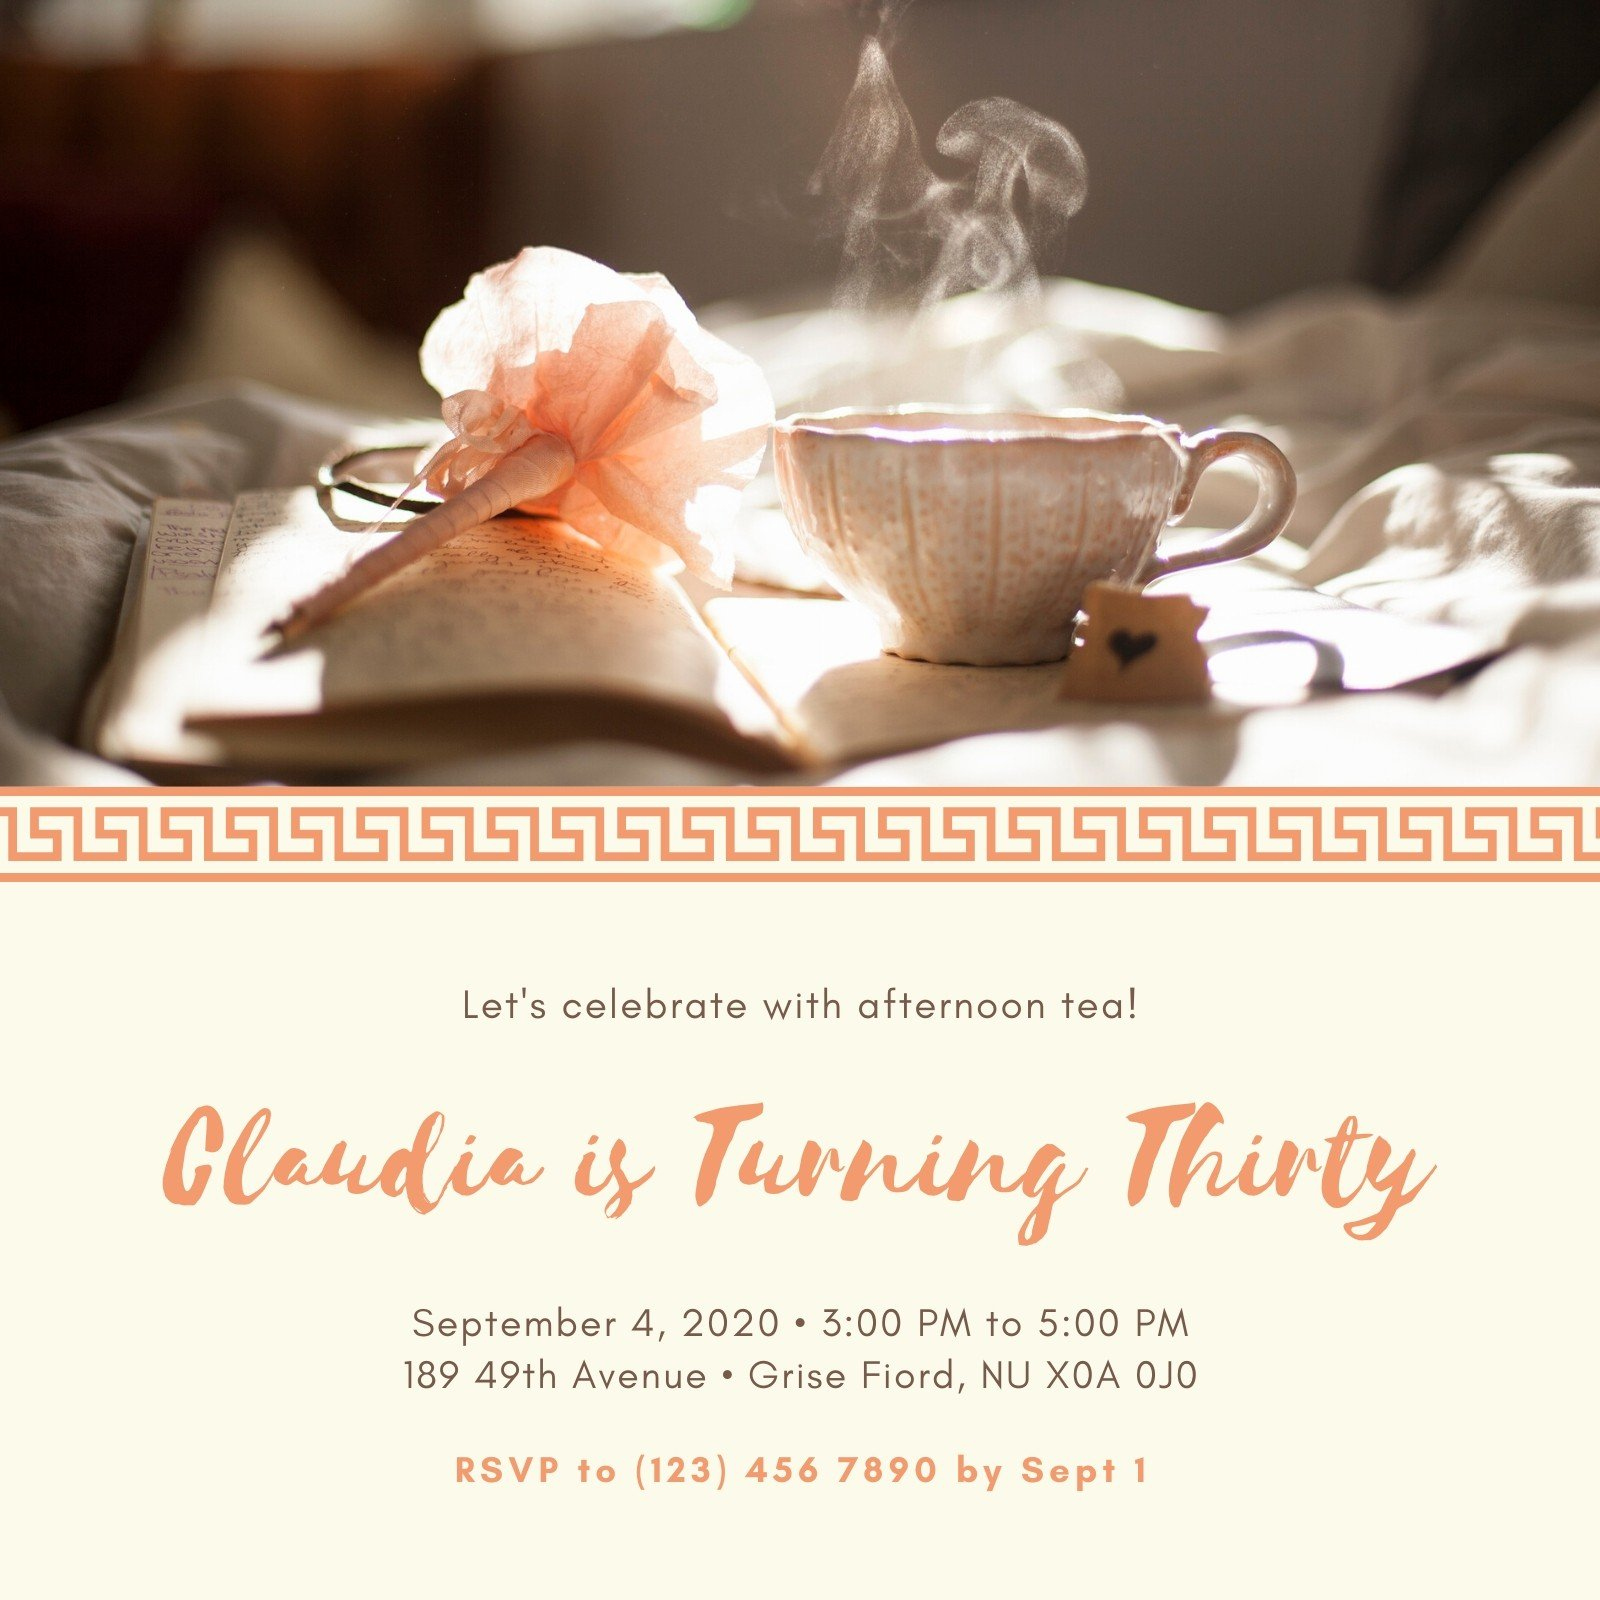 Free Custom Printable Tea Party Invitation Templates | Canva intended for Free Printable Kitchen Tea Invitation Templates